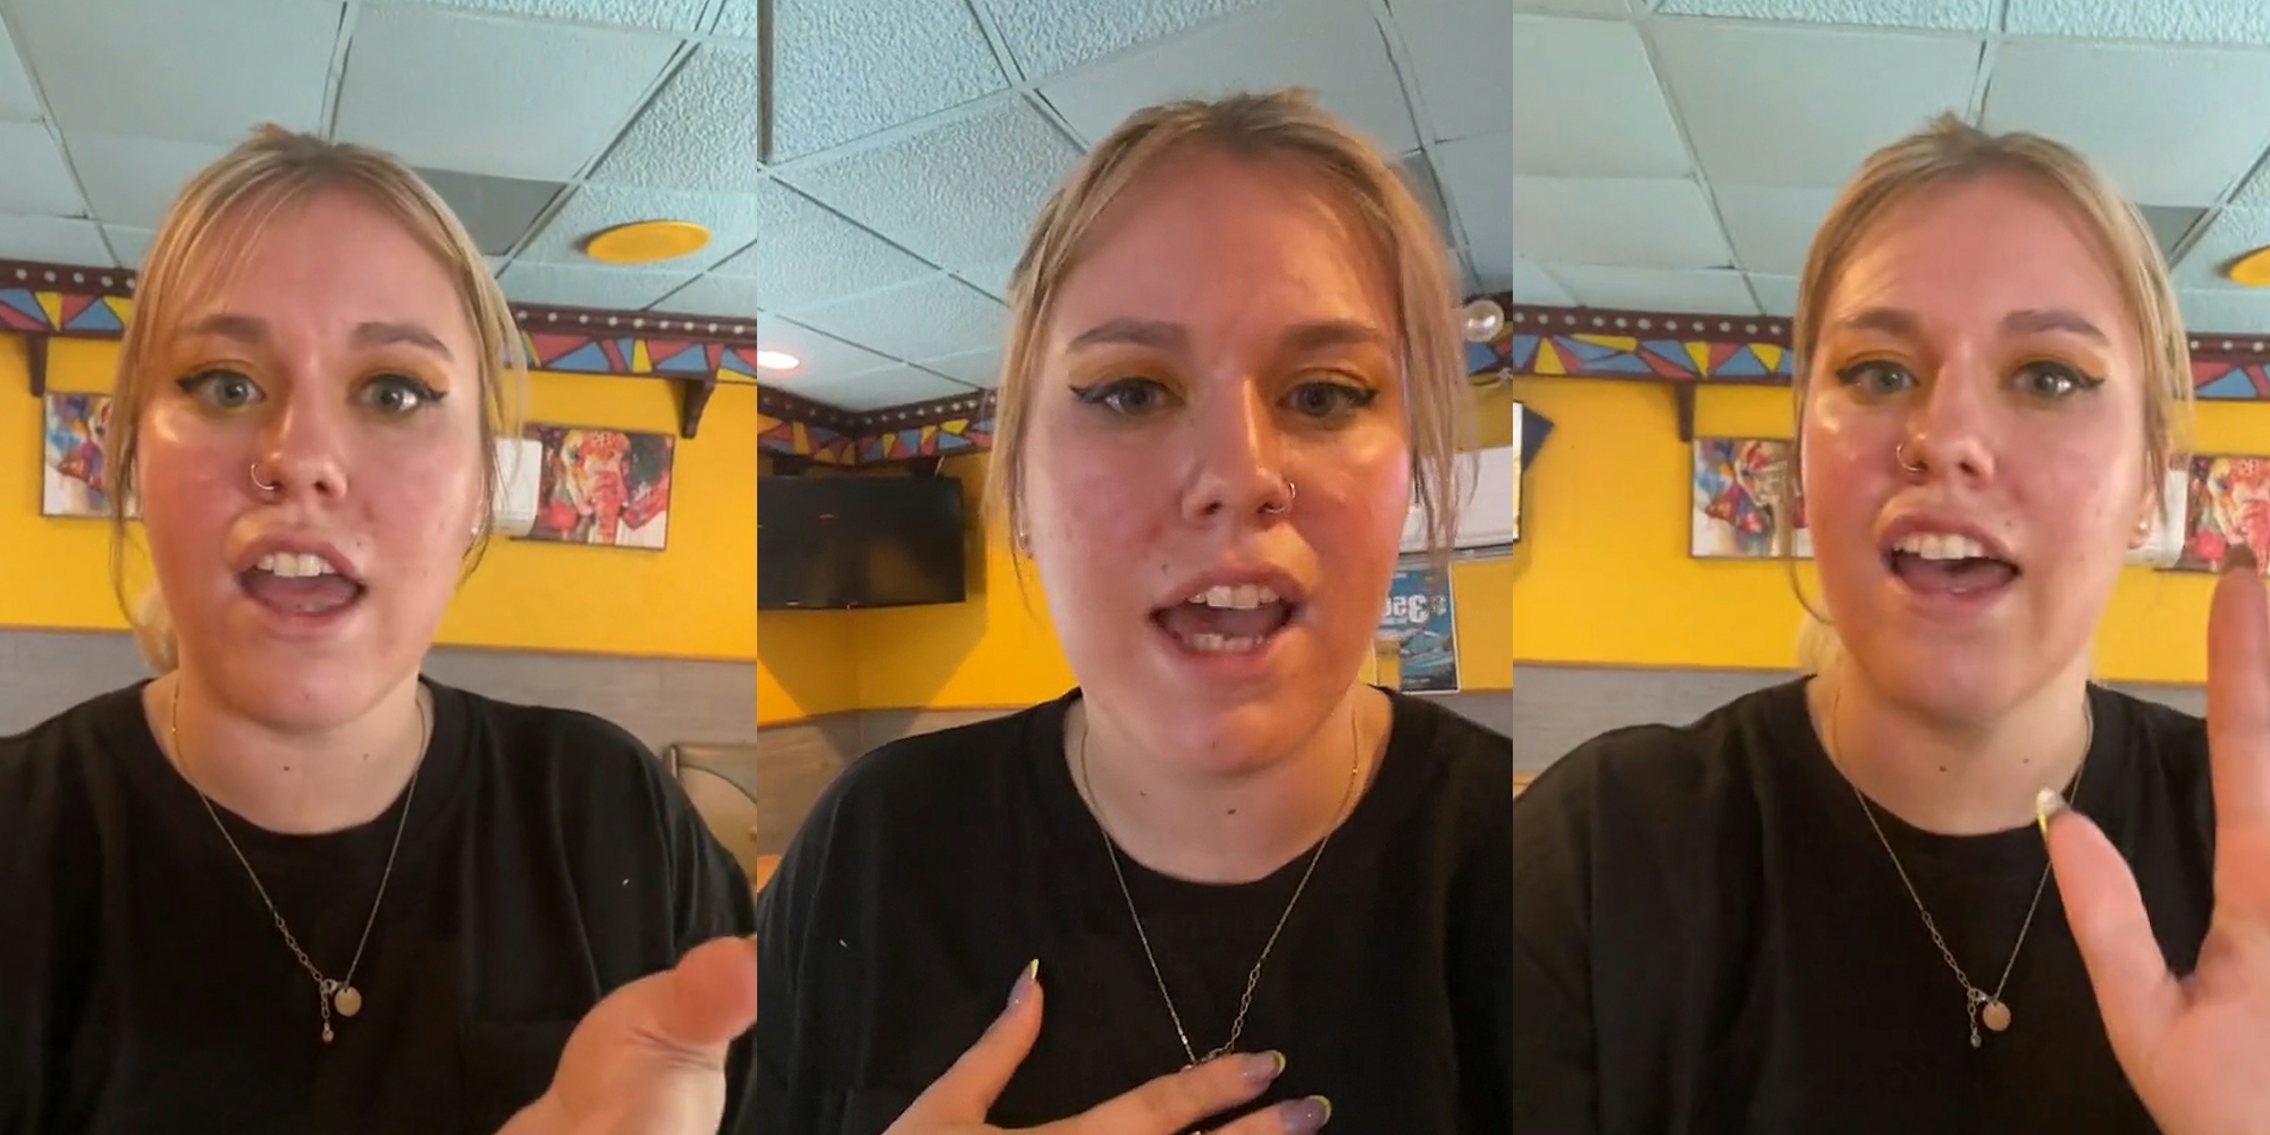 Woman speaking in restaurant with yellow walls with hand out (l) woman speaking in restaurant with yellow walls with hand on chest (c) woman speaking in restaurant with yellow walls with hand up in (r)